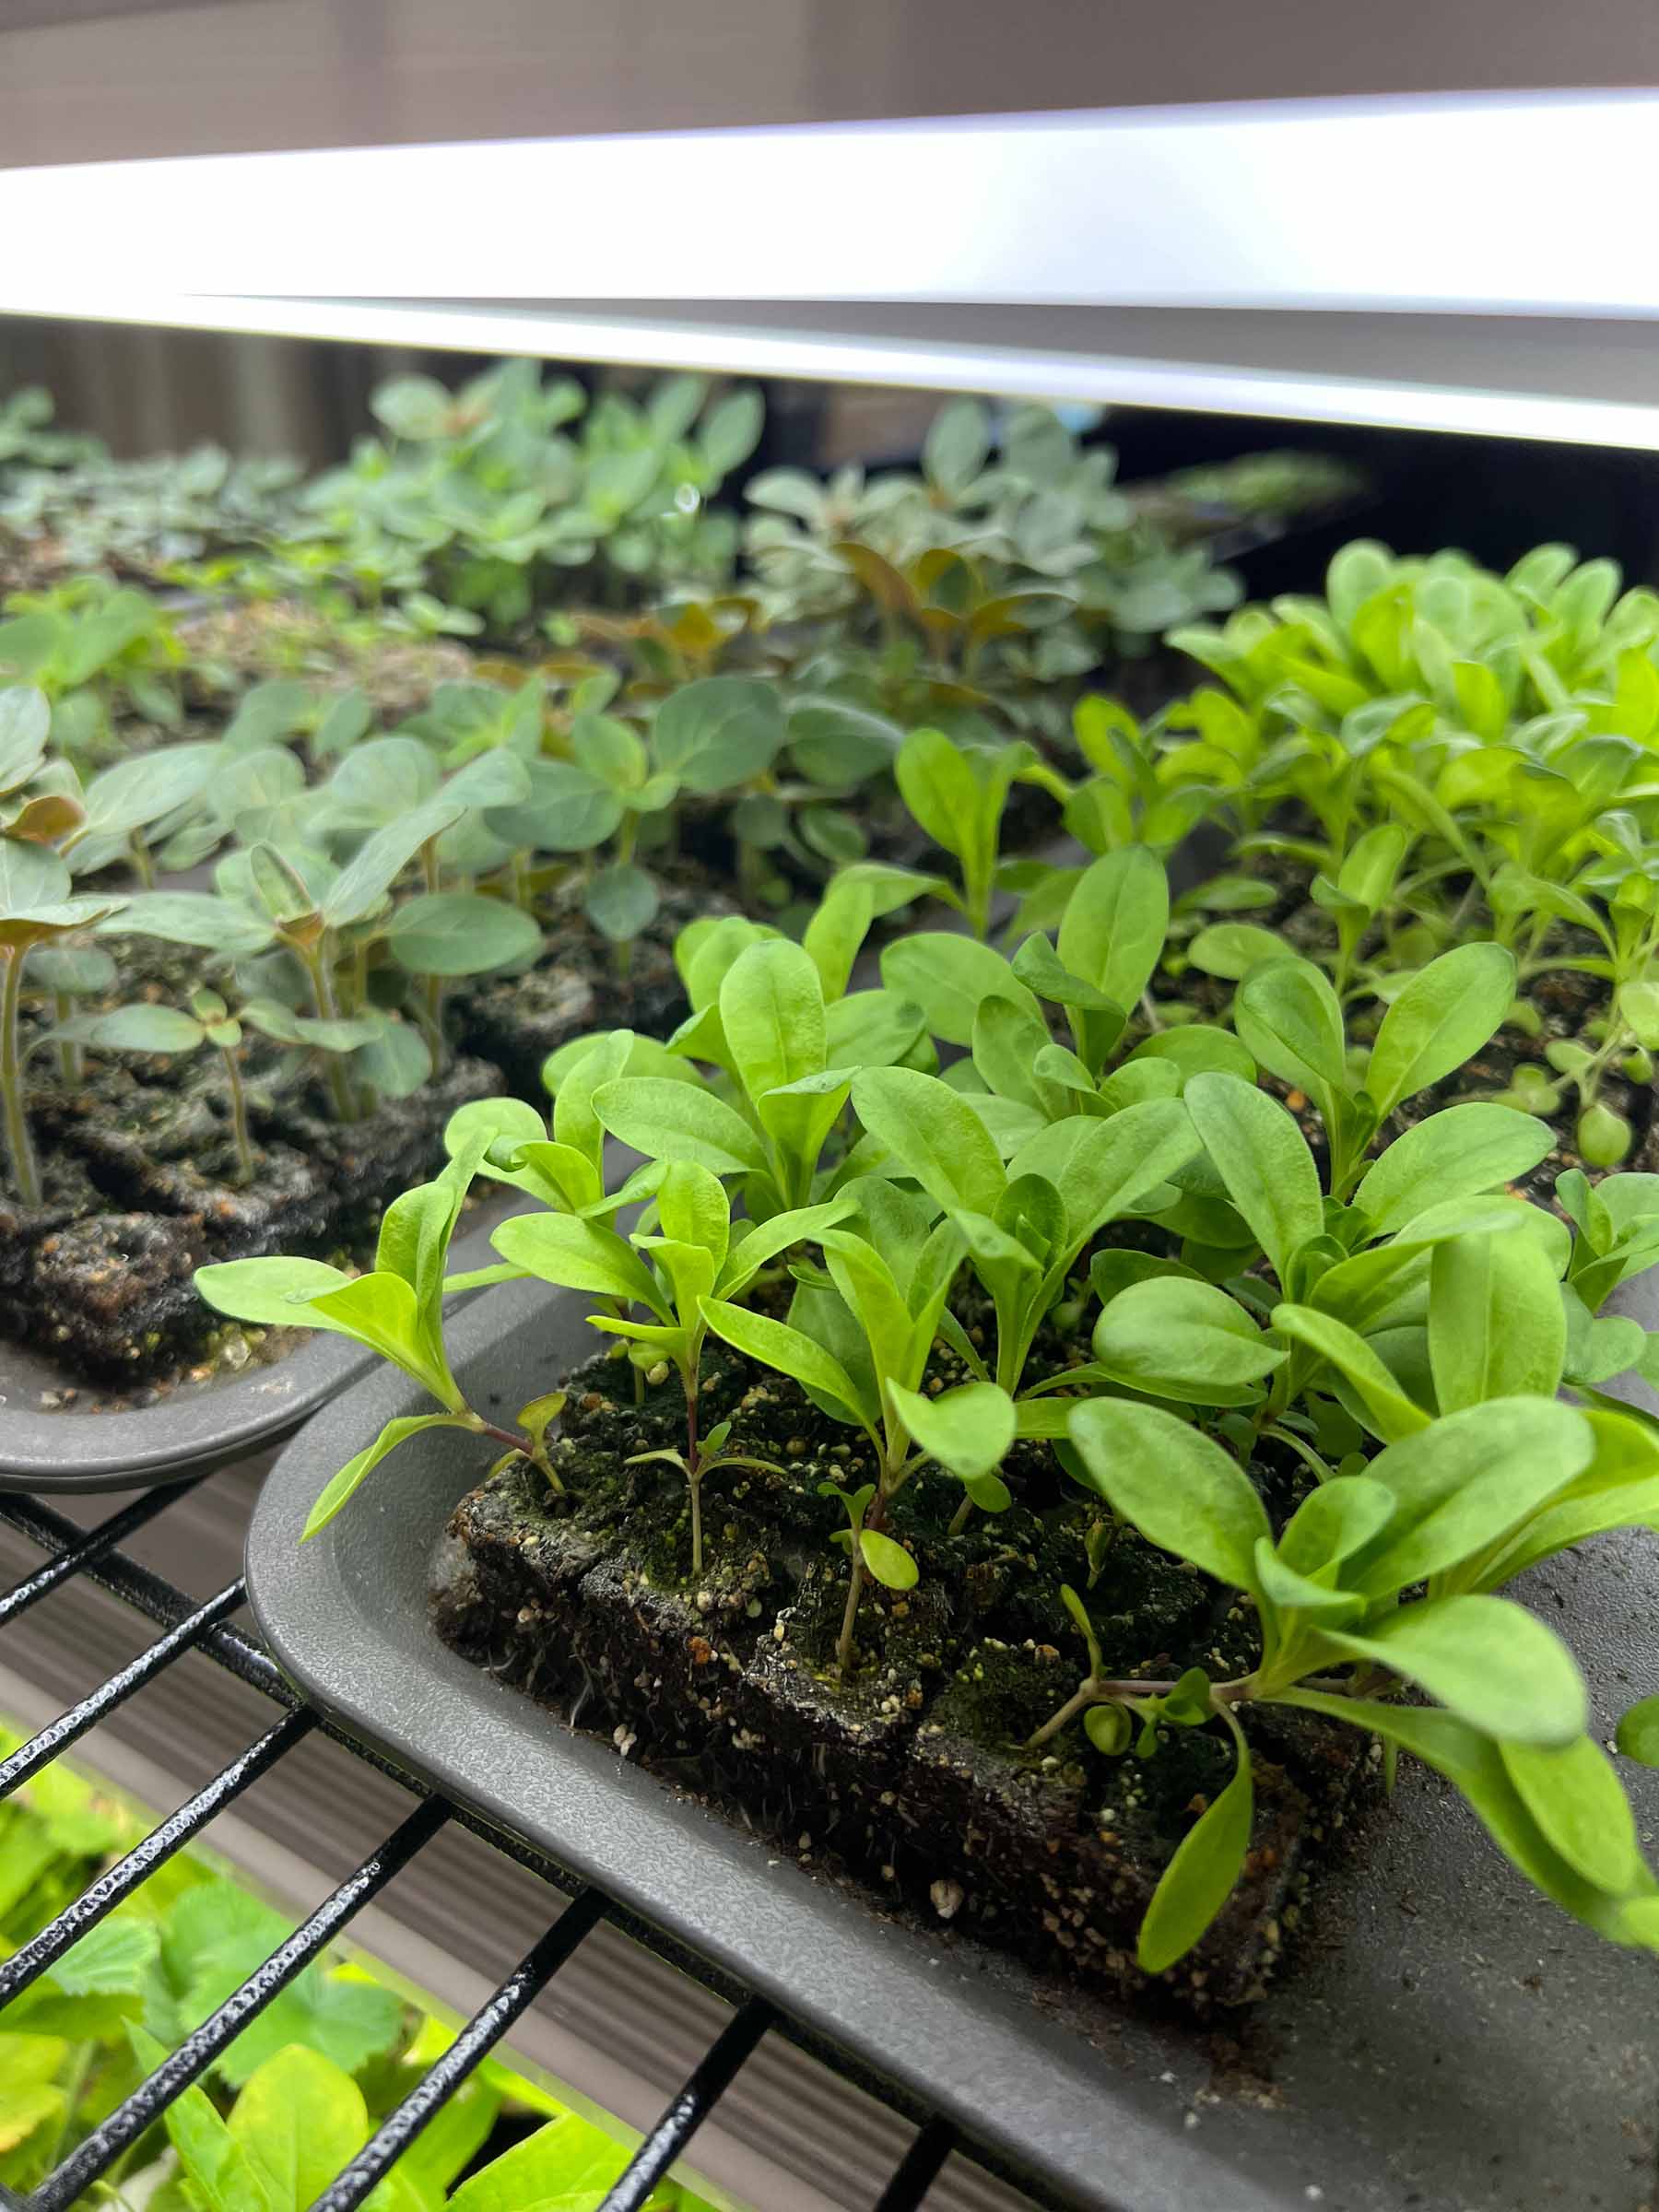 Small plants growing in tray